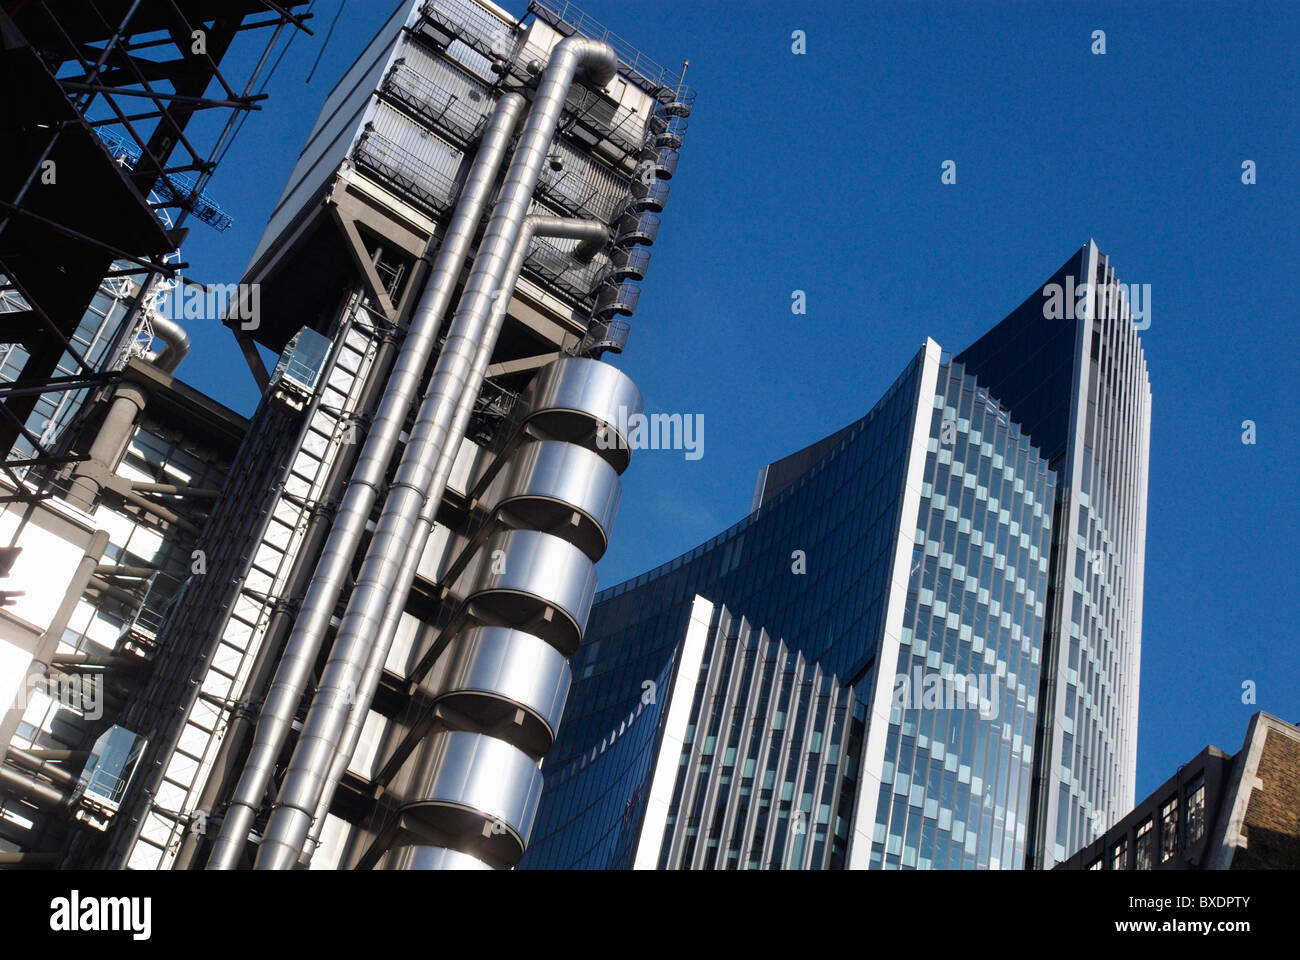 Lloyds building and the Willis Building City of London United Kingdom. Stock Photo